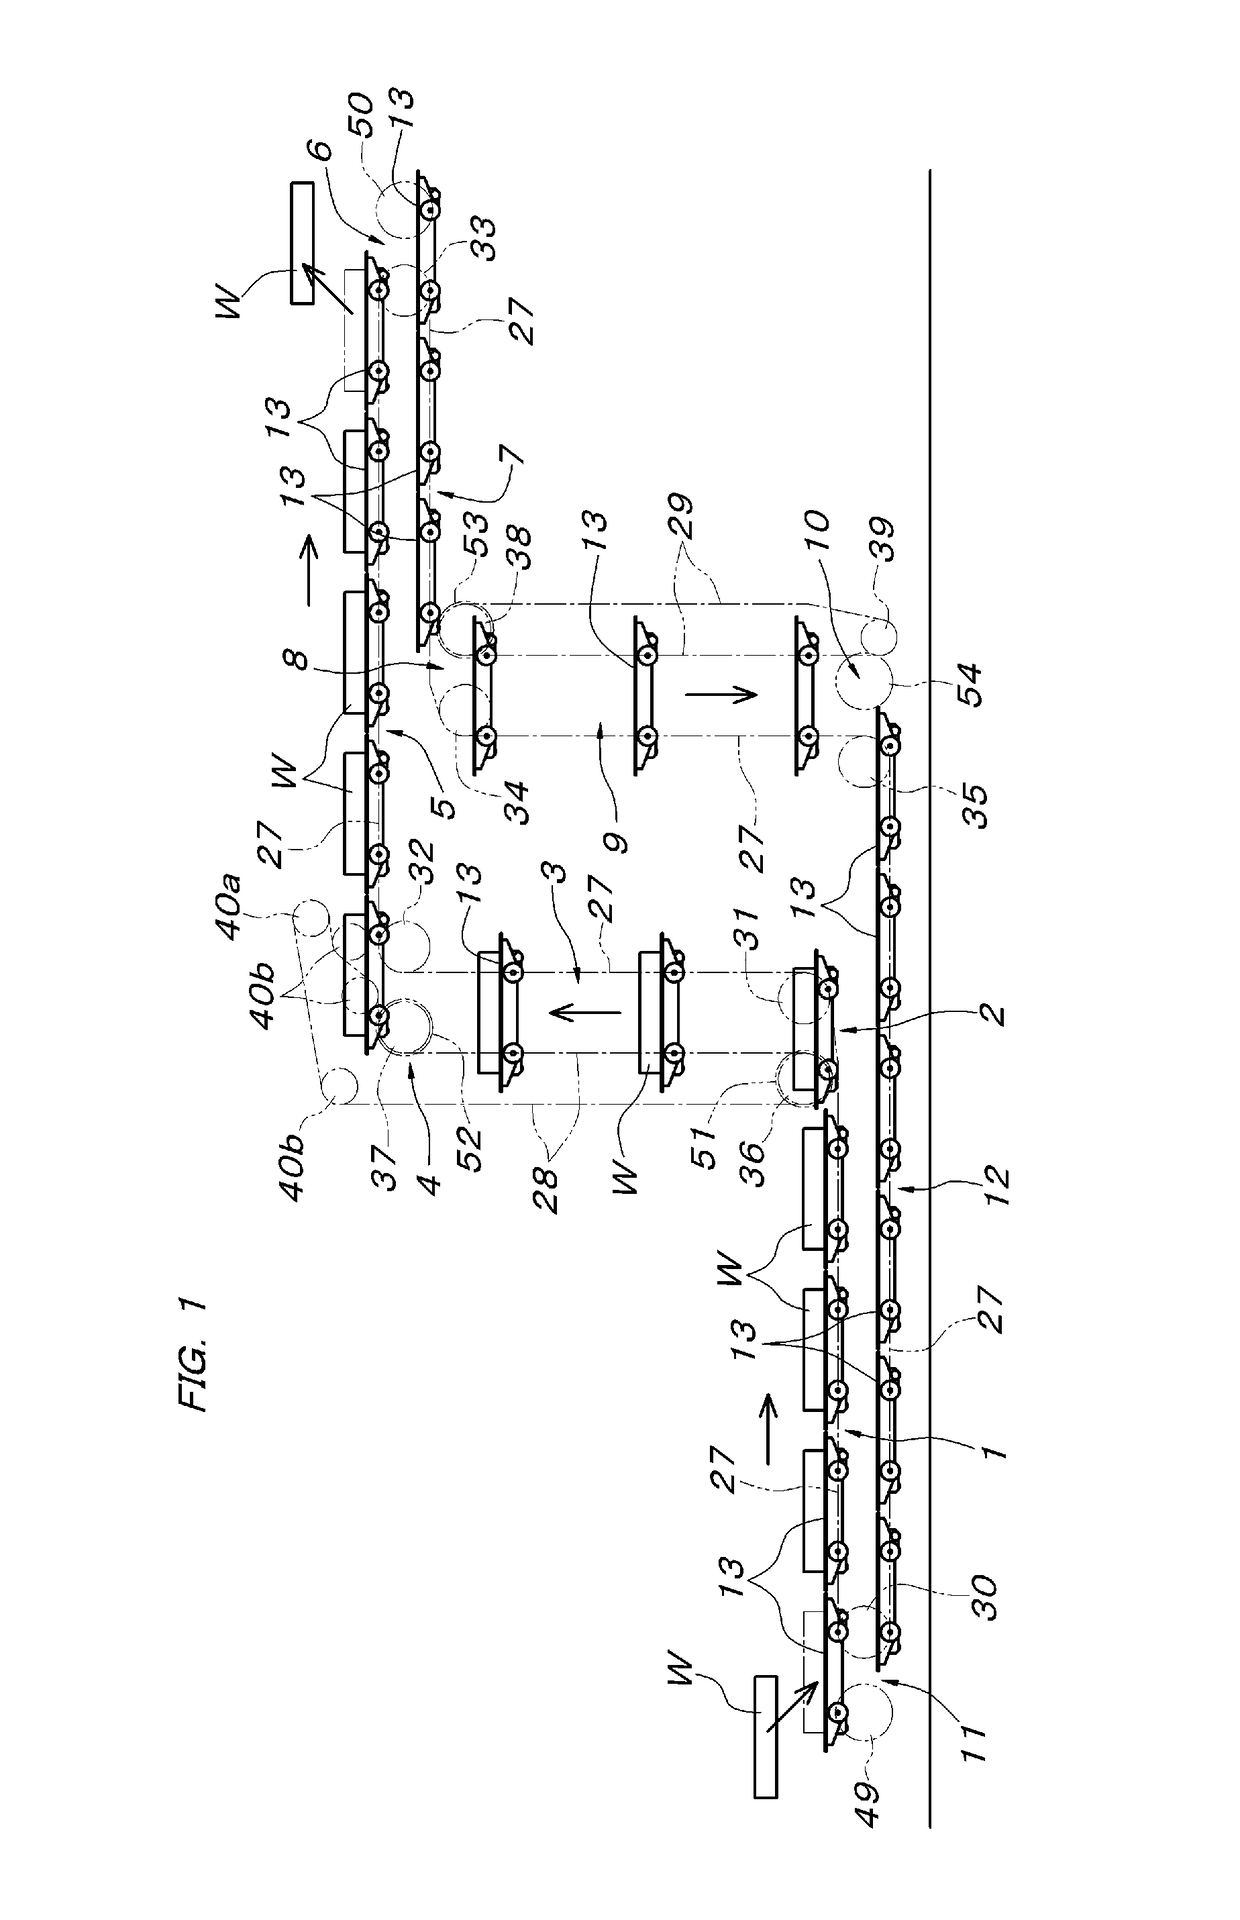 Cart-Type Transporting Device